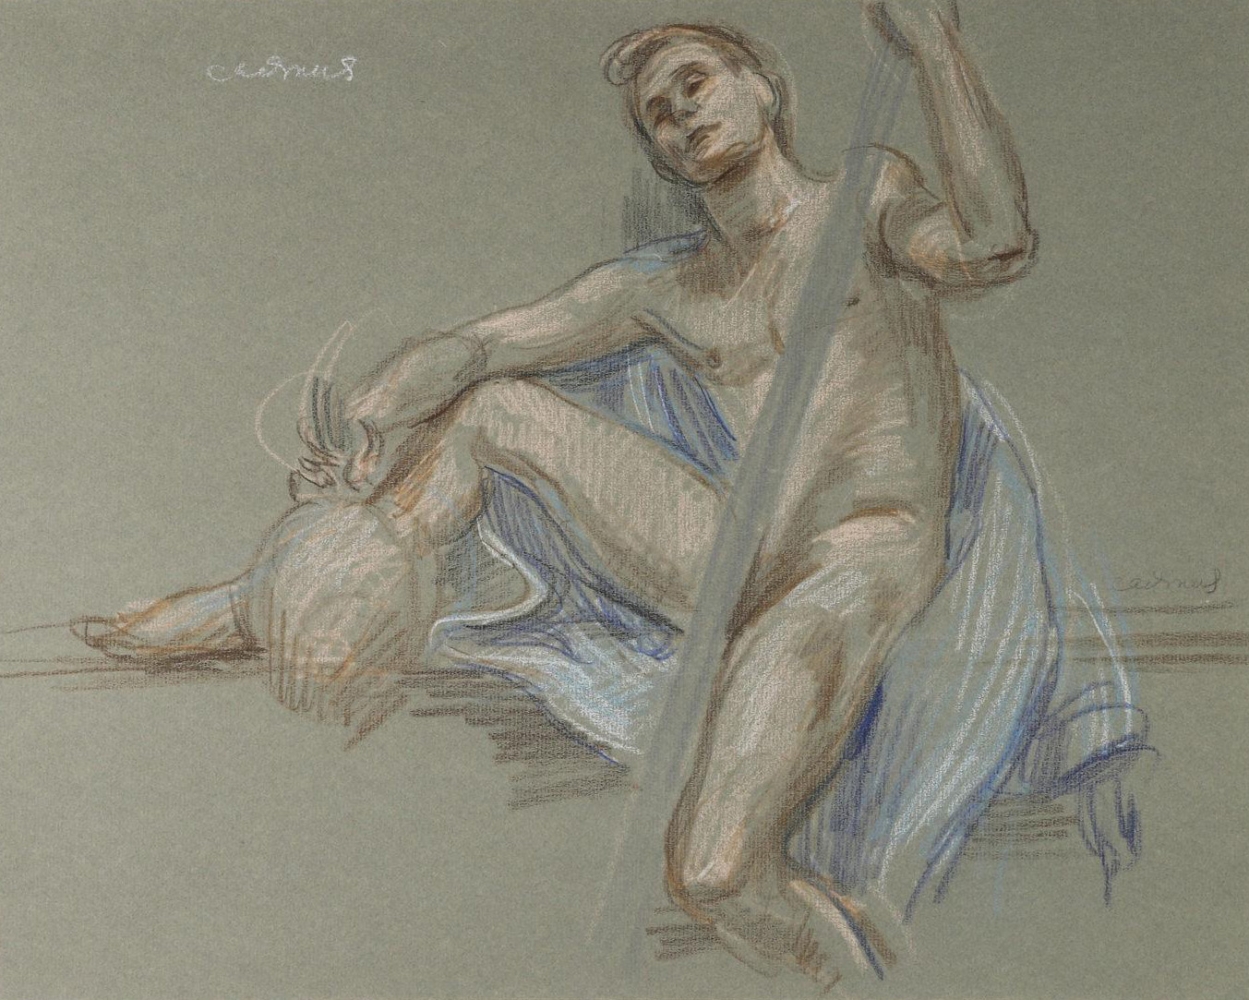 &quot;Study for &#039;David and Goliath&#039;&quot;, ca. 1971